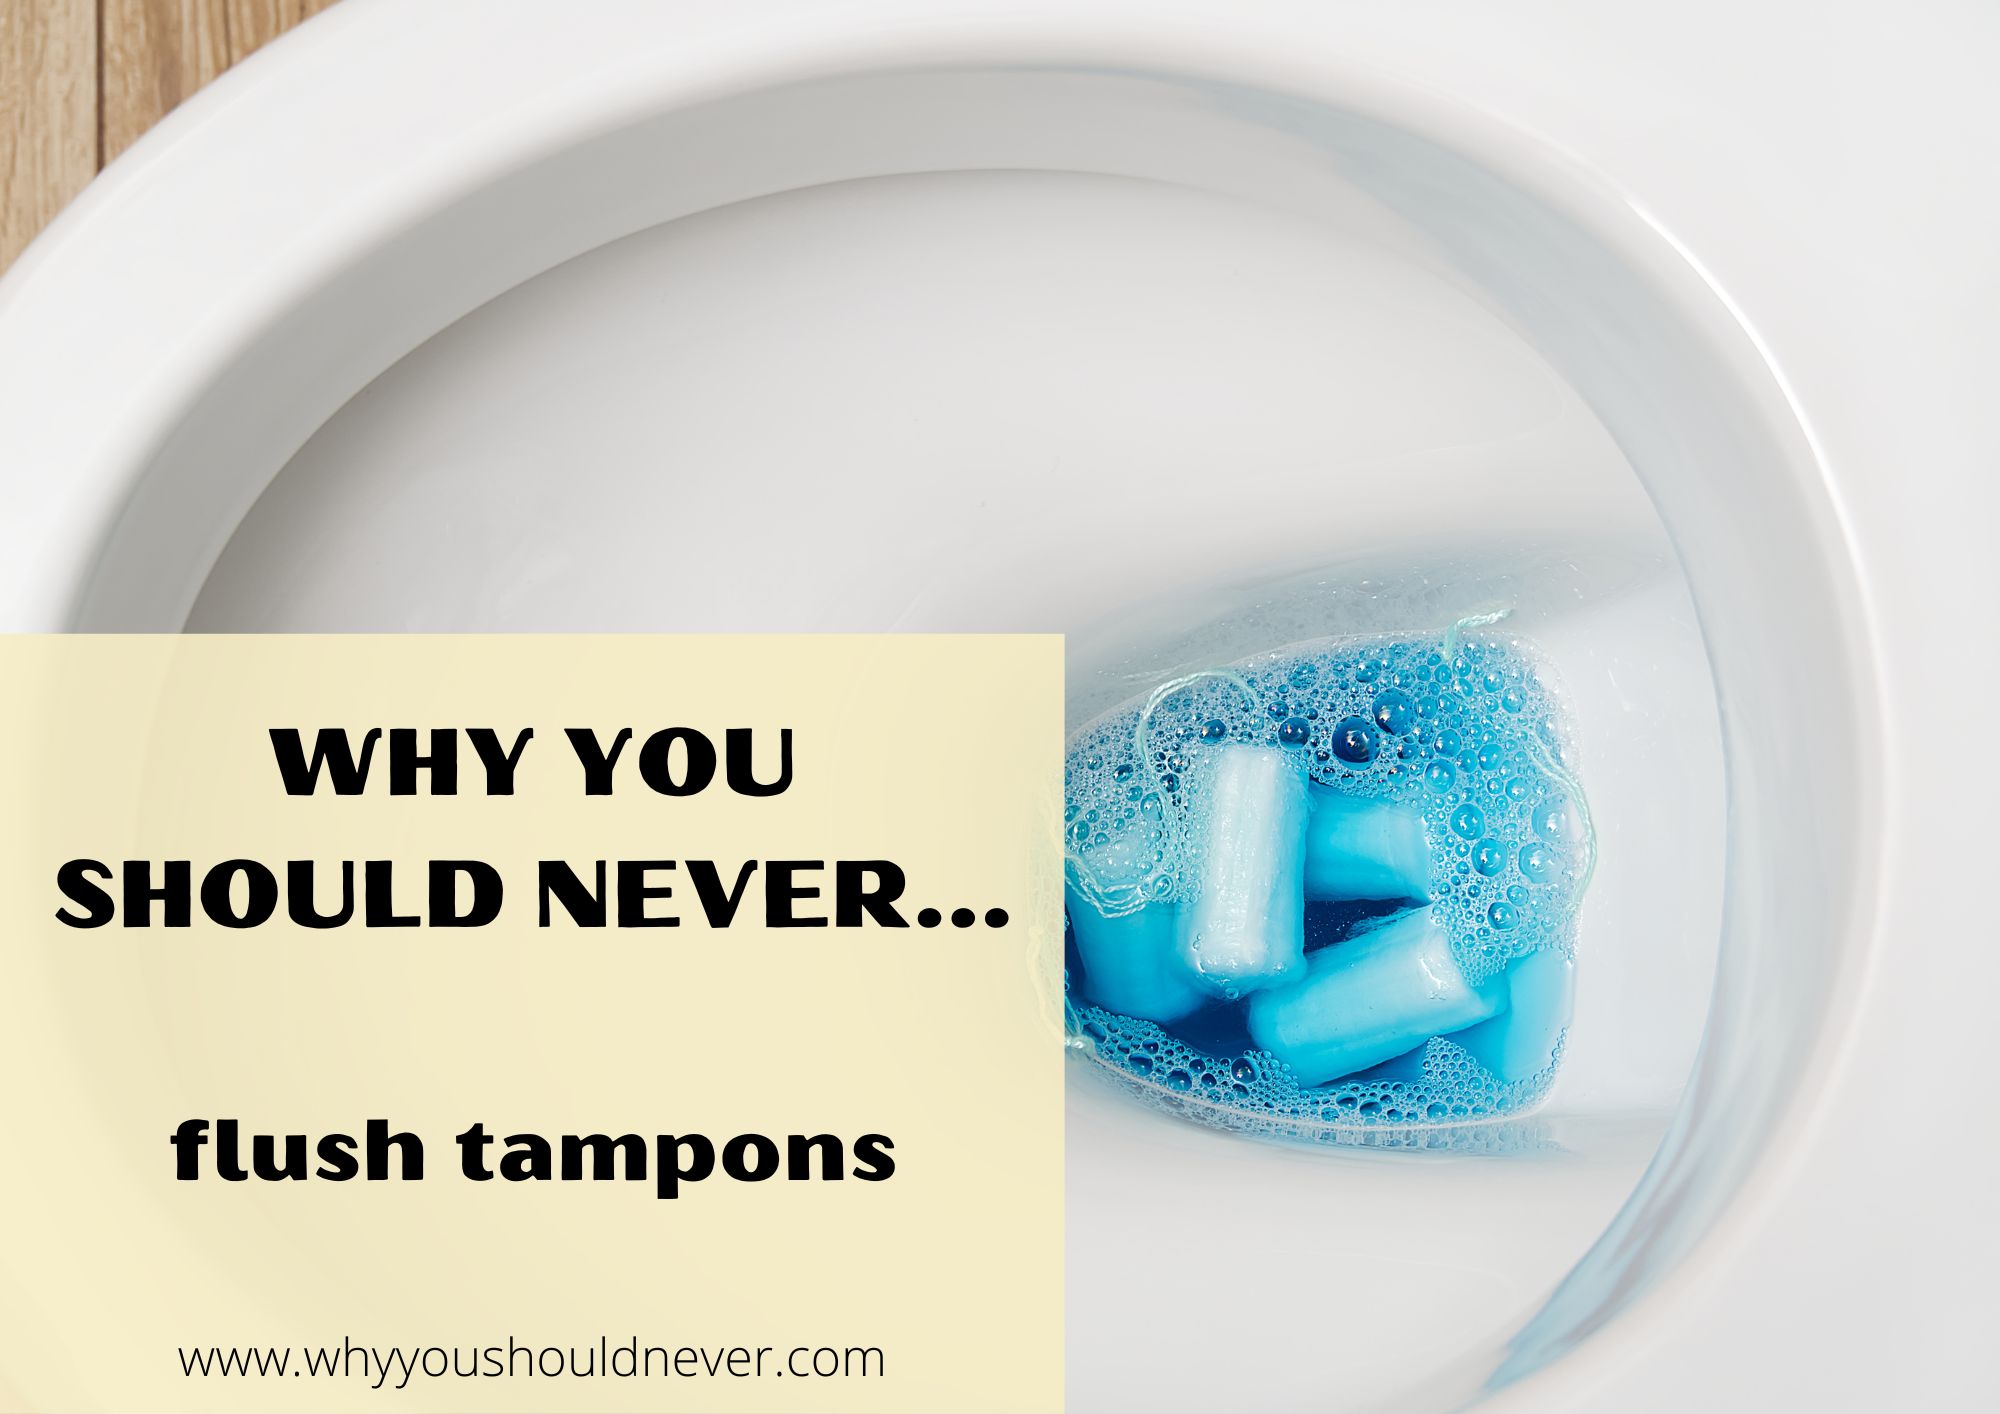 Why You Should Never Flush Tampons